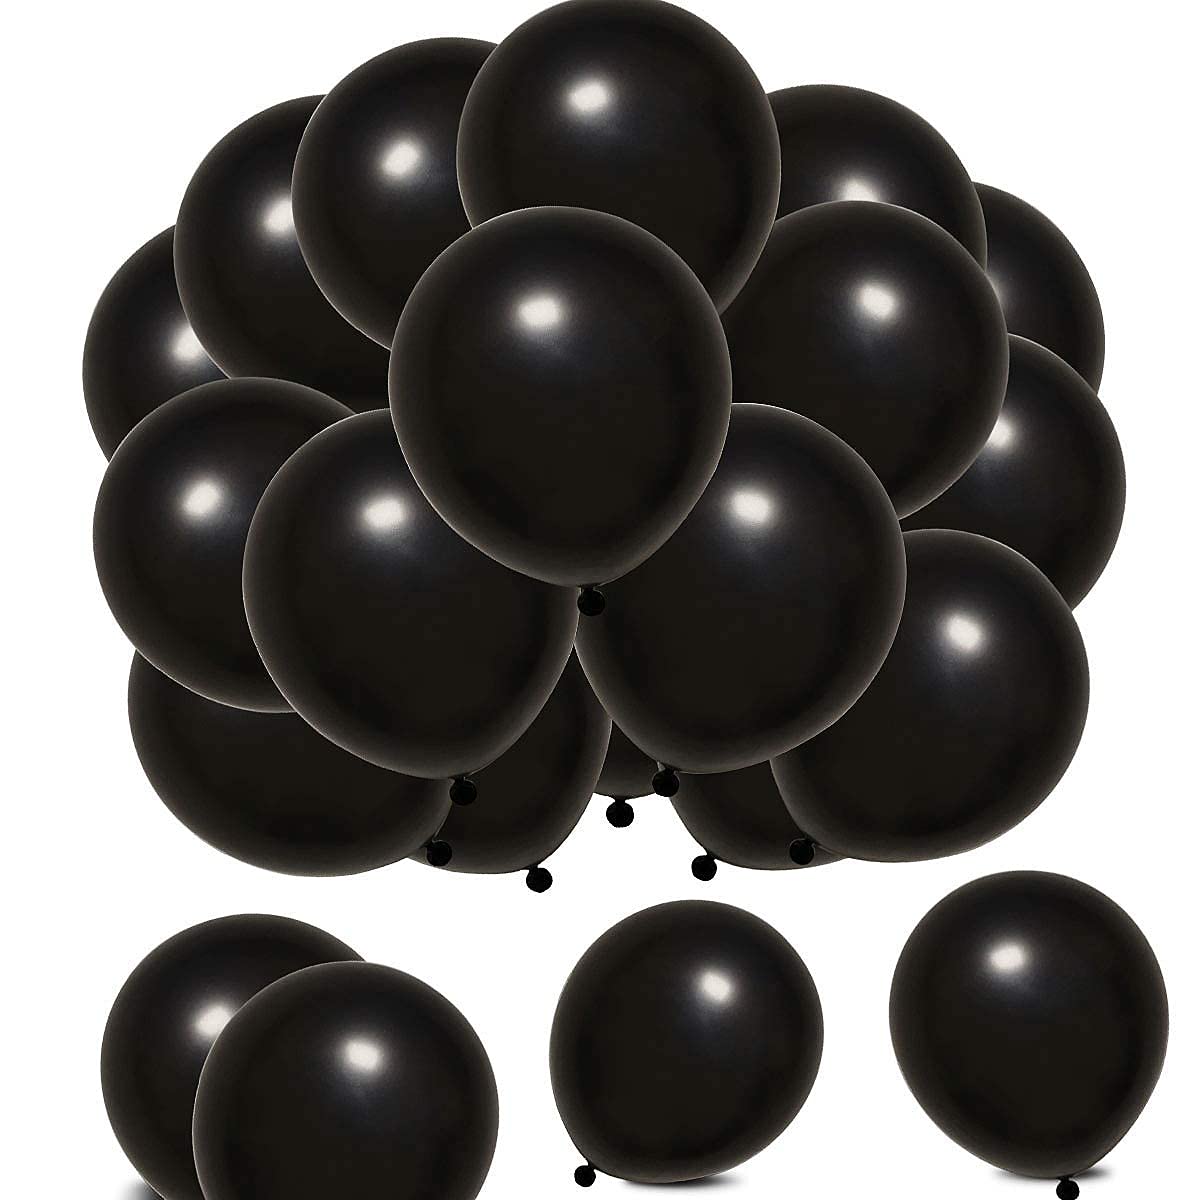 Book Cover Elecrainbow 100 Count 320 Grams Thickened Black Balloons for Anniversary, Birthday, Retirement, Farewell, Memorial, Going Away Party, Basketball, Halloween Party,Pack of 100 …